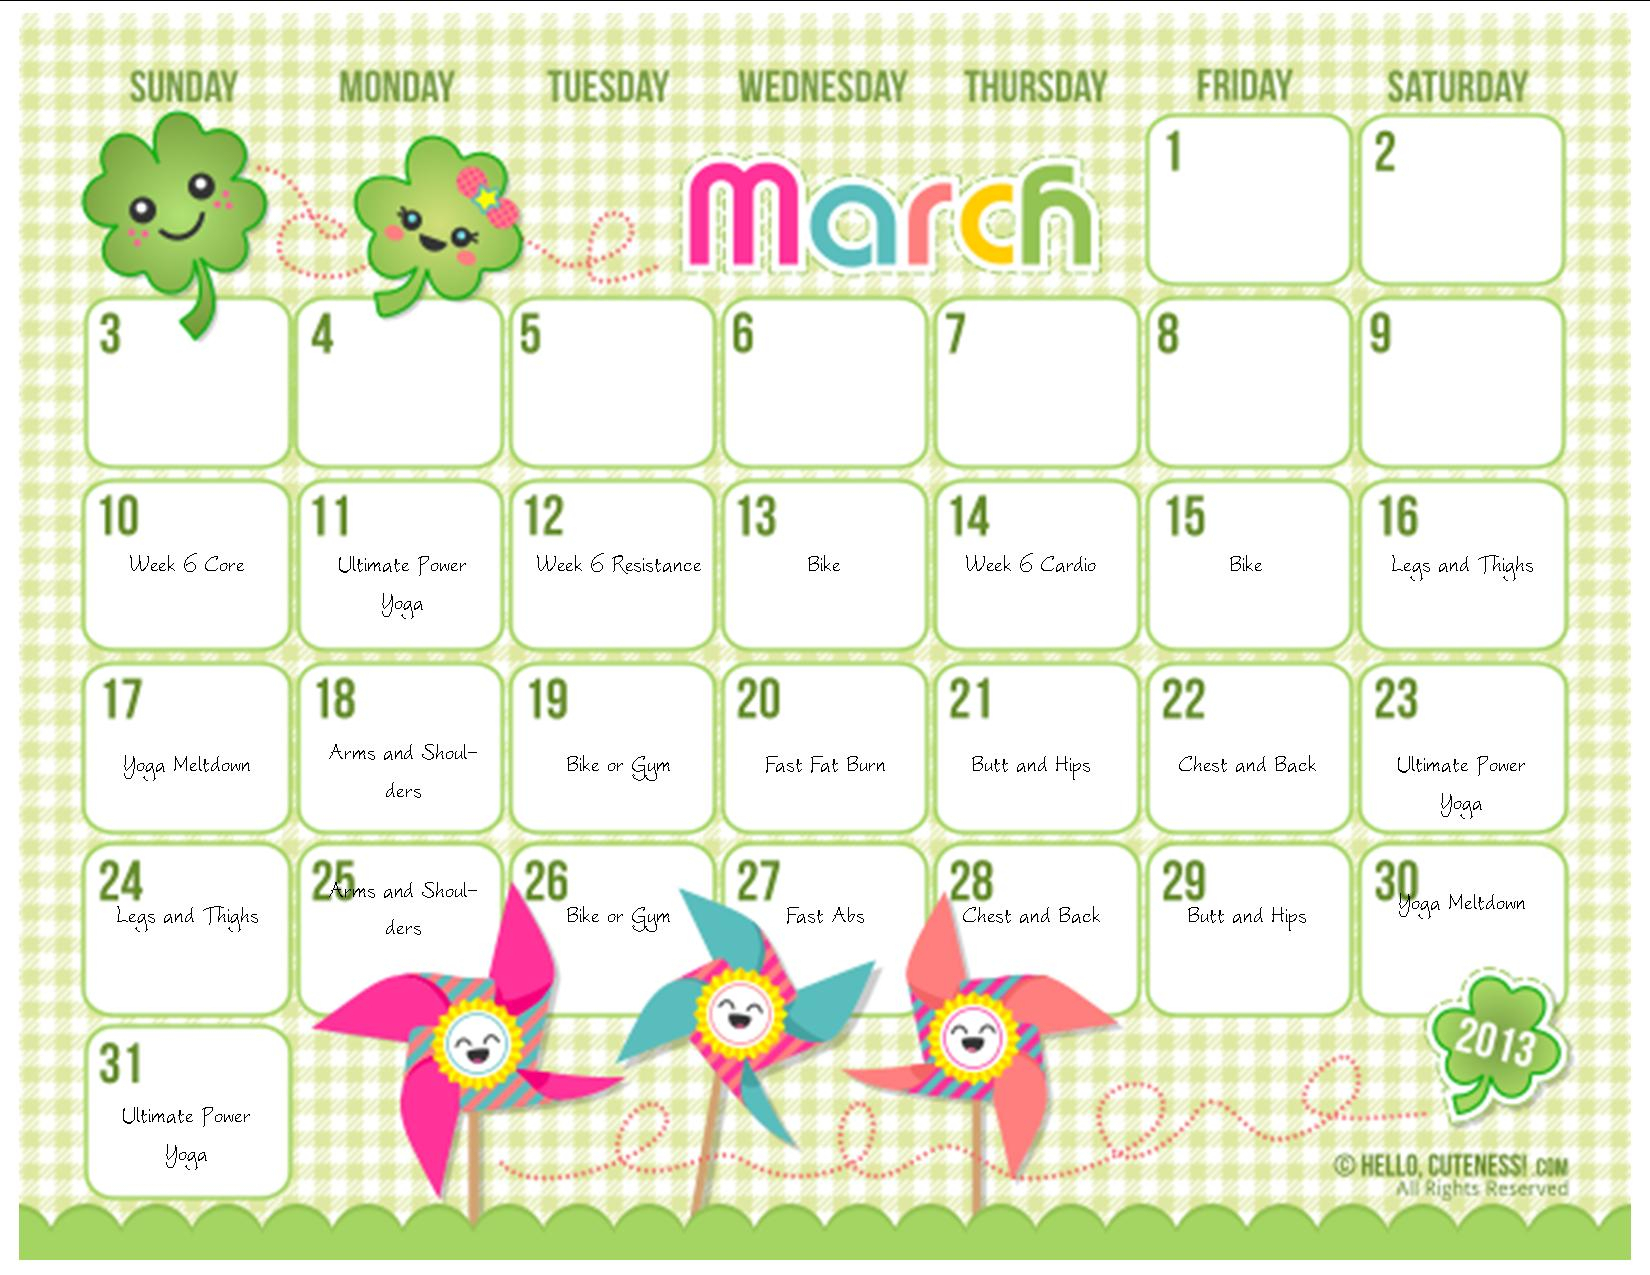 How To Customize Cute Calendars With Microsoft Publisher